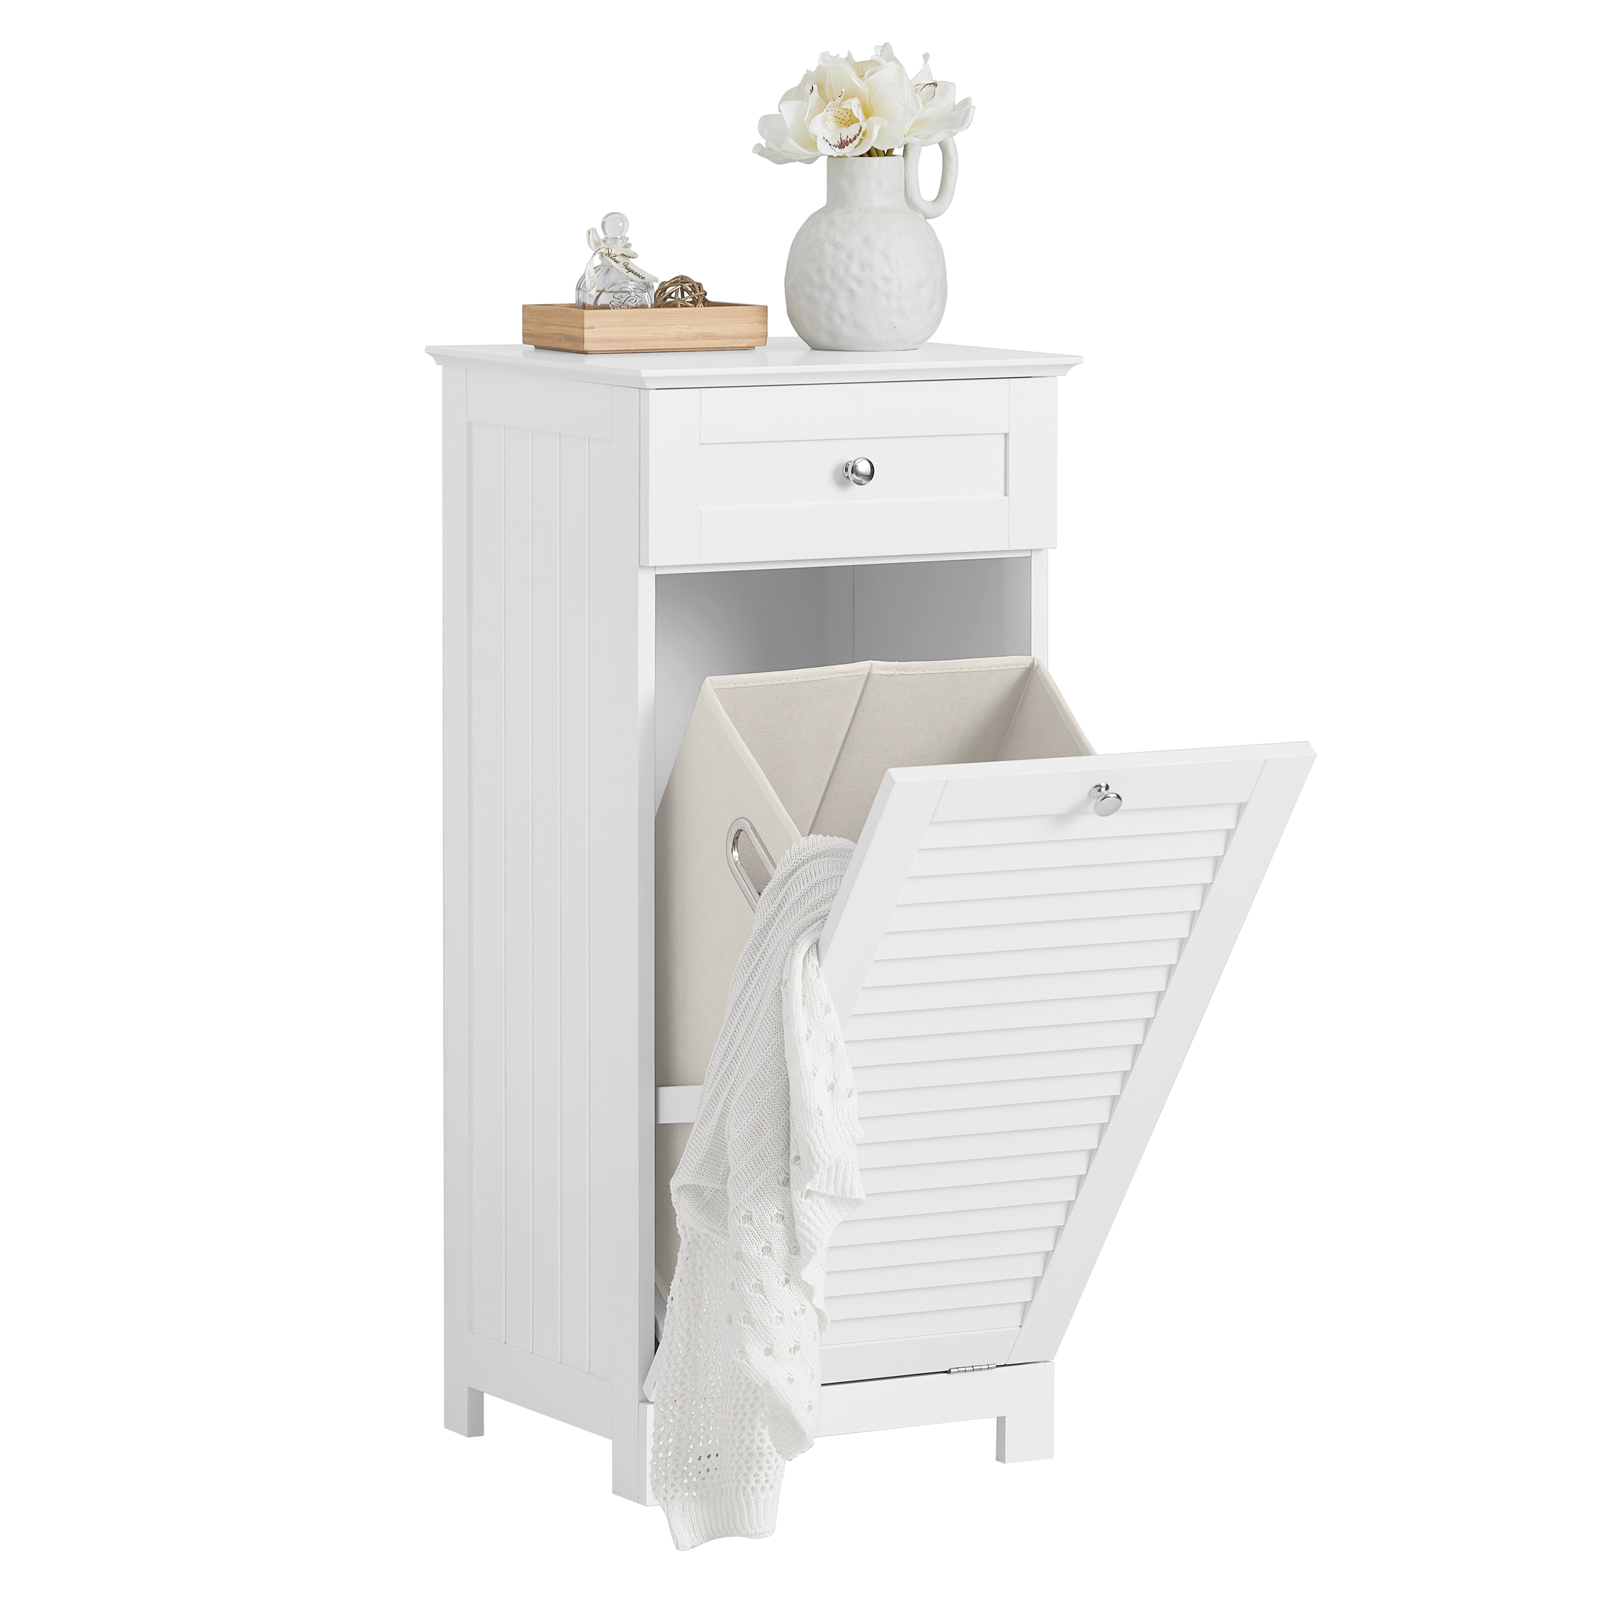 Haotian Tall Bathroom Cabinet with 3 Shelves, Bzr17-w